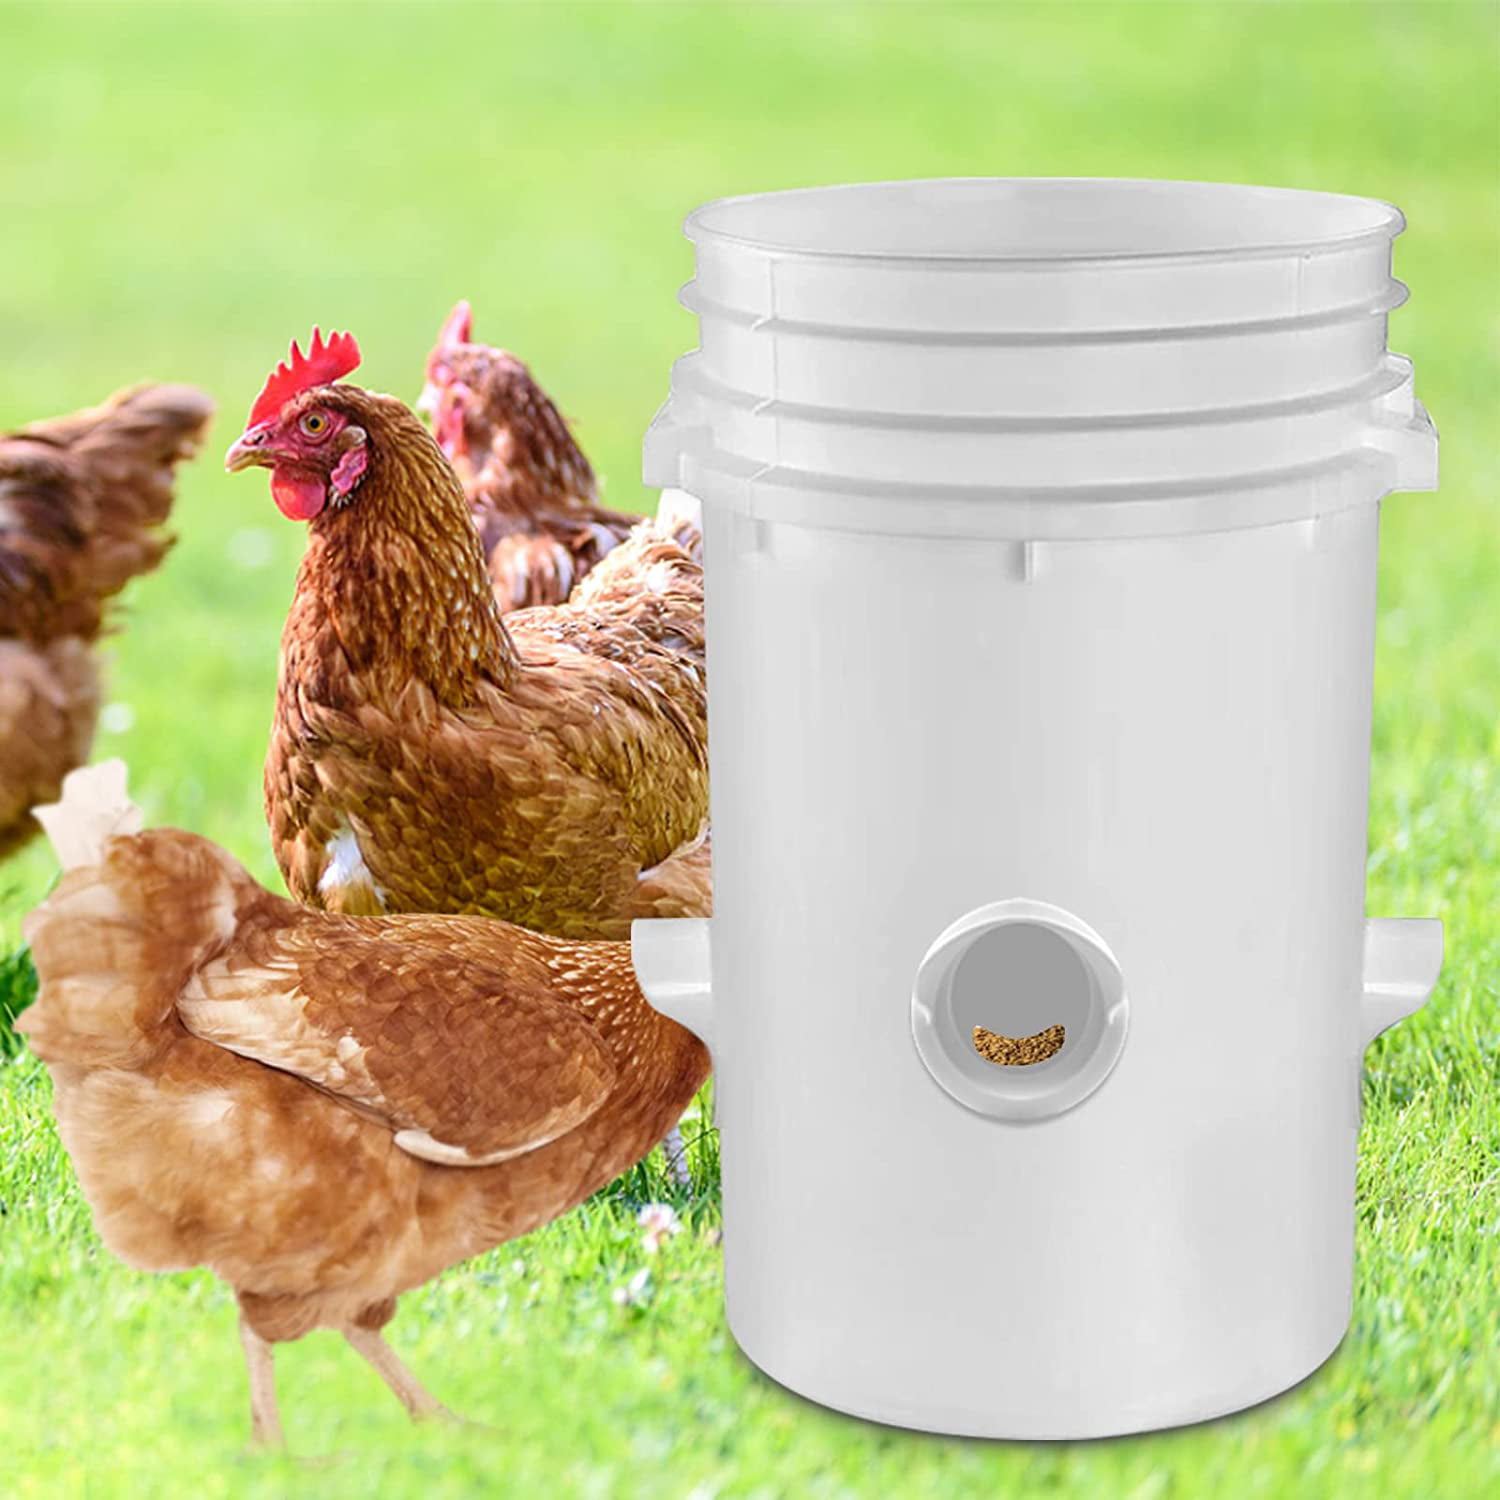 Durable+Rainproof; Constant Feed+Less Waste Boxes（8 Ports,1 Hole Saw） Barrels Well Fit for Buckets Easy Installation Bins Troughs Fast DIY Chicken Feeder Poultry Feeder 